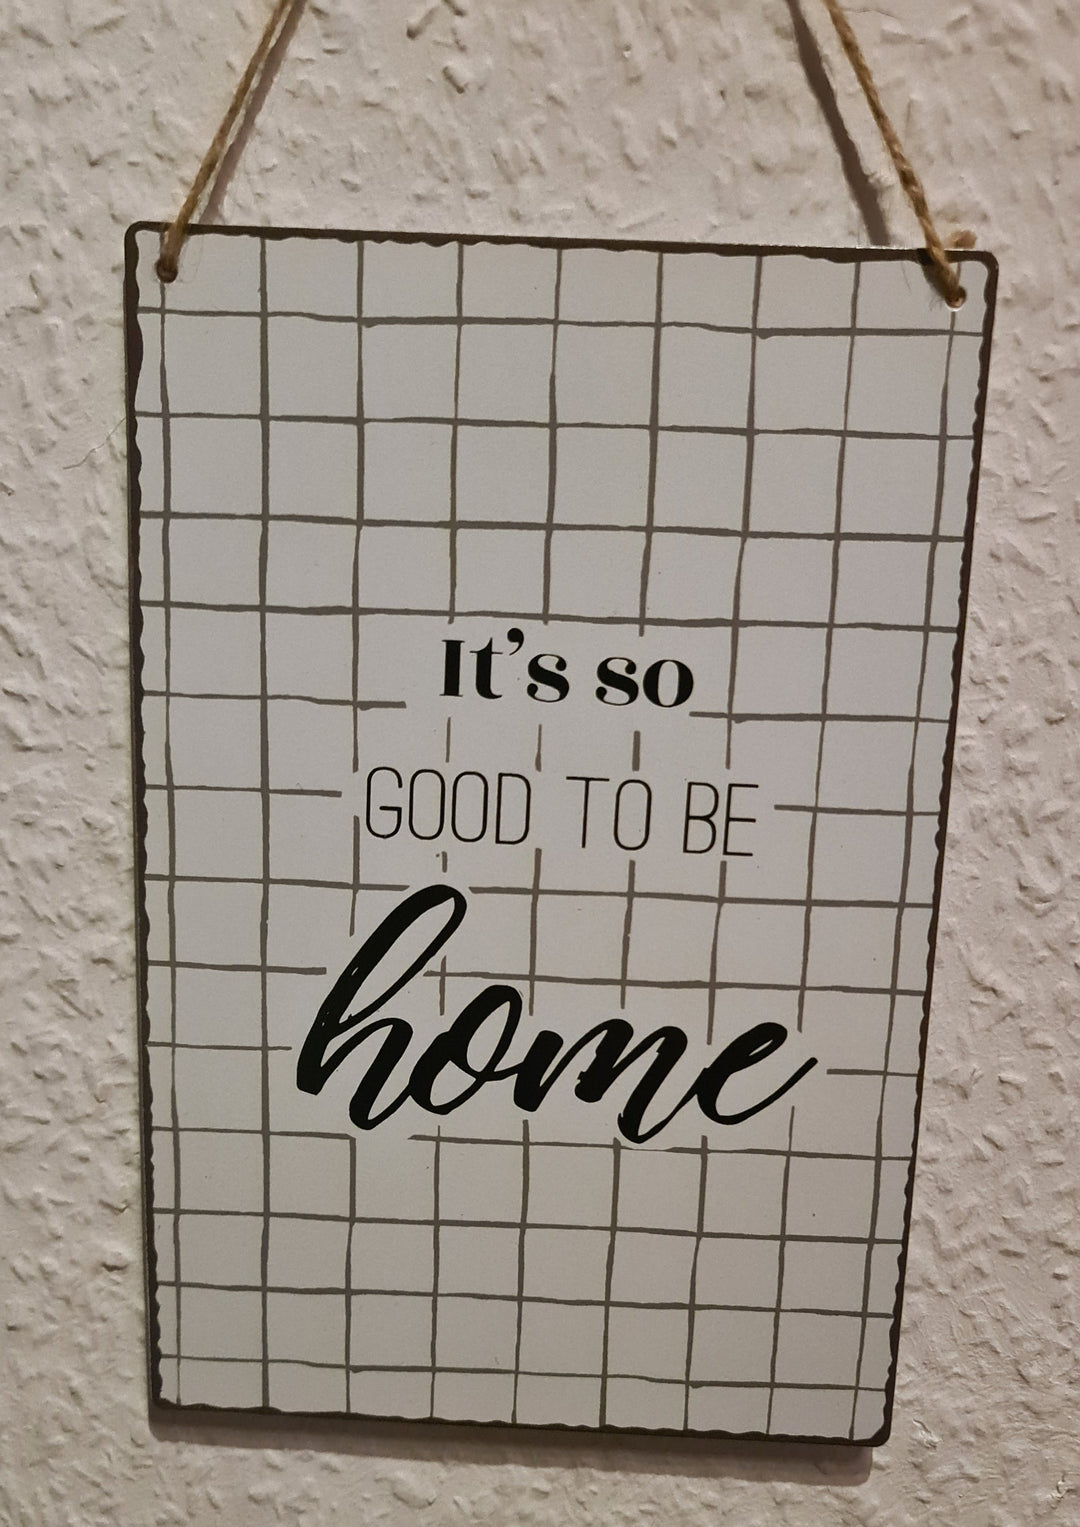 Blechschild  21 cm  x 14 cm mit Beschriftung "It's so good to be home" - British Moments